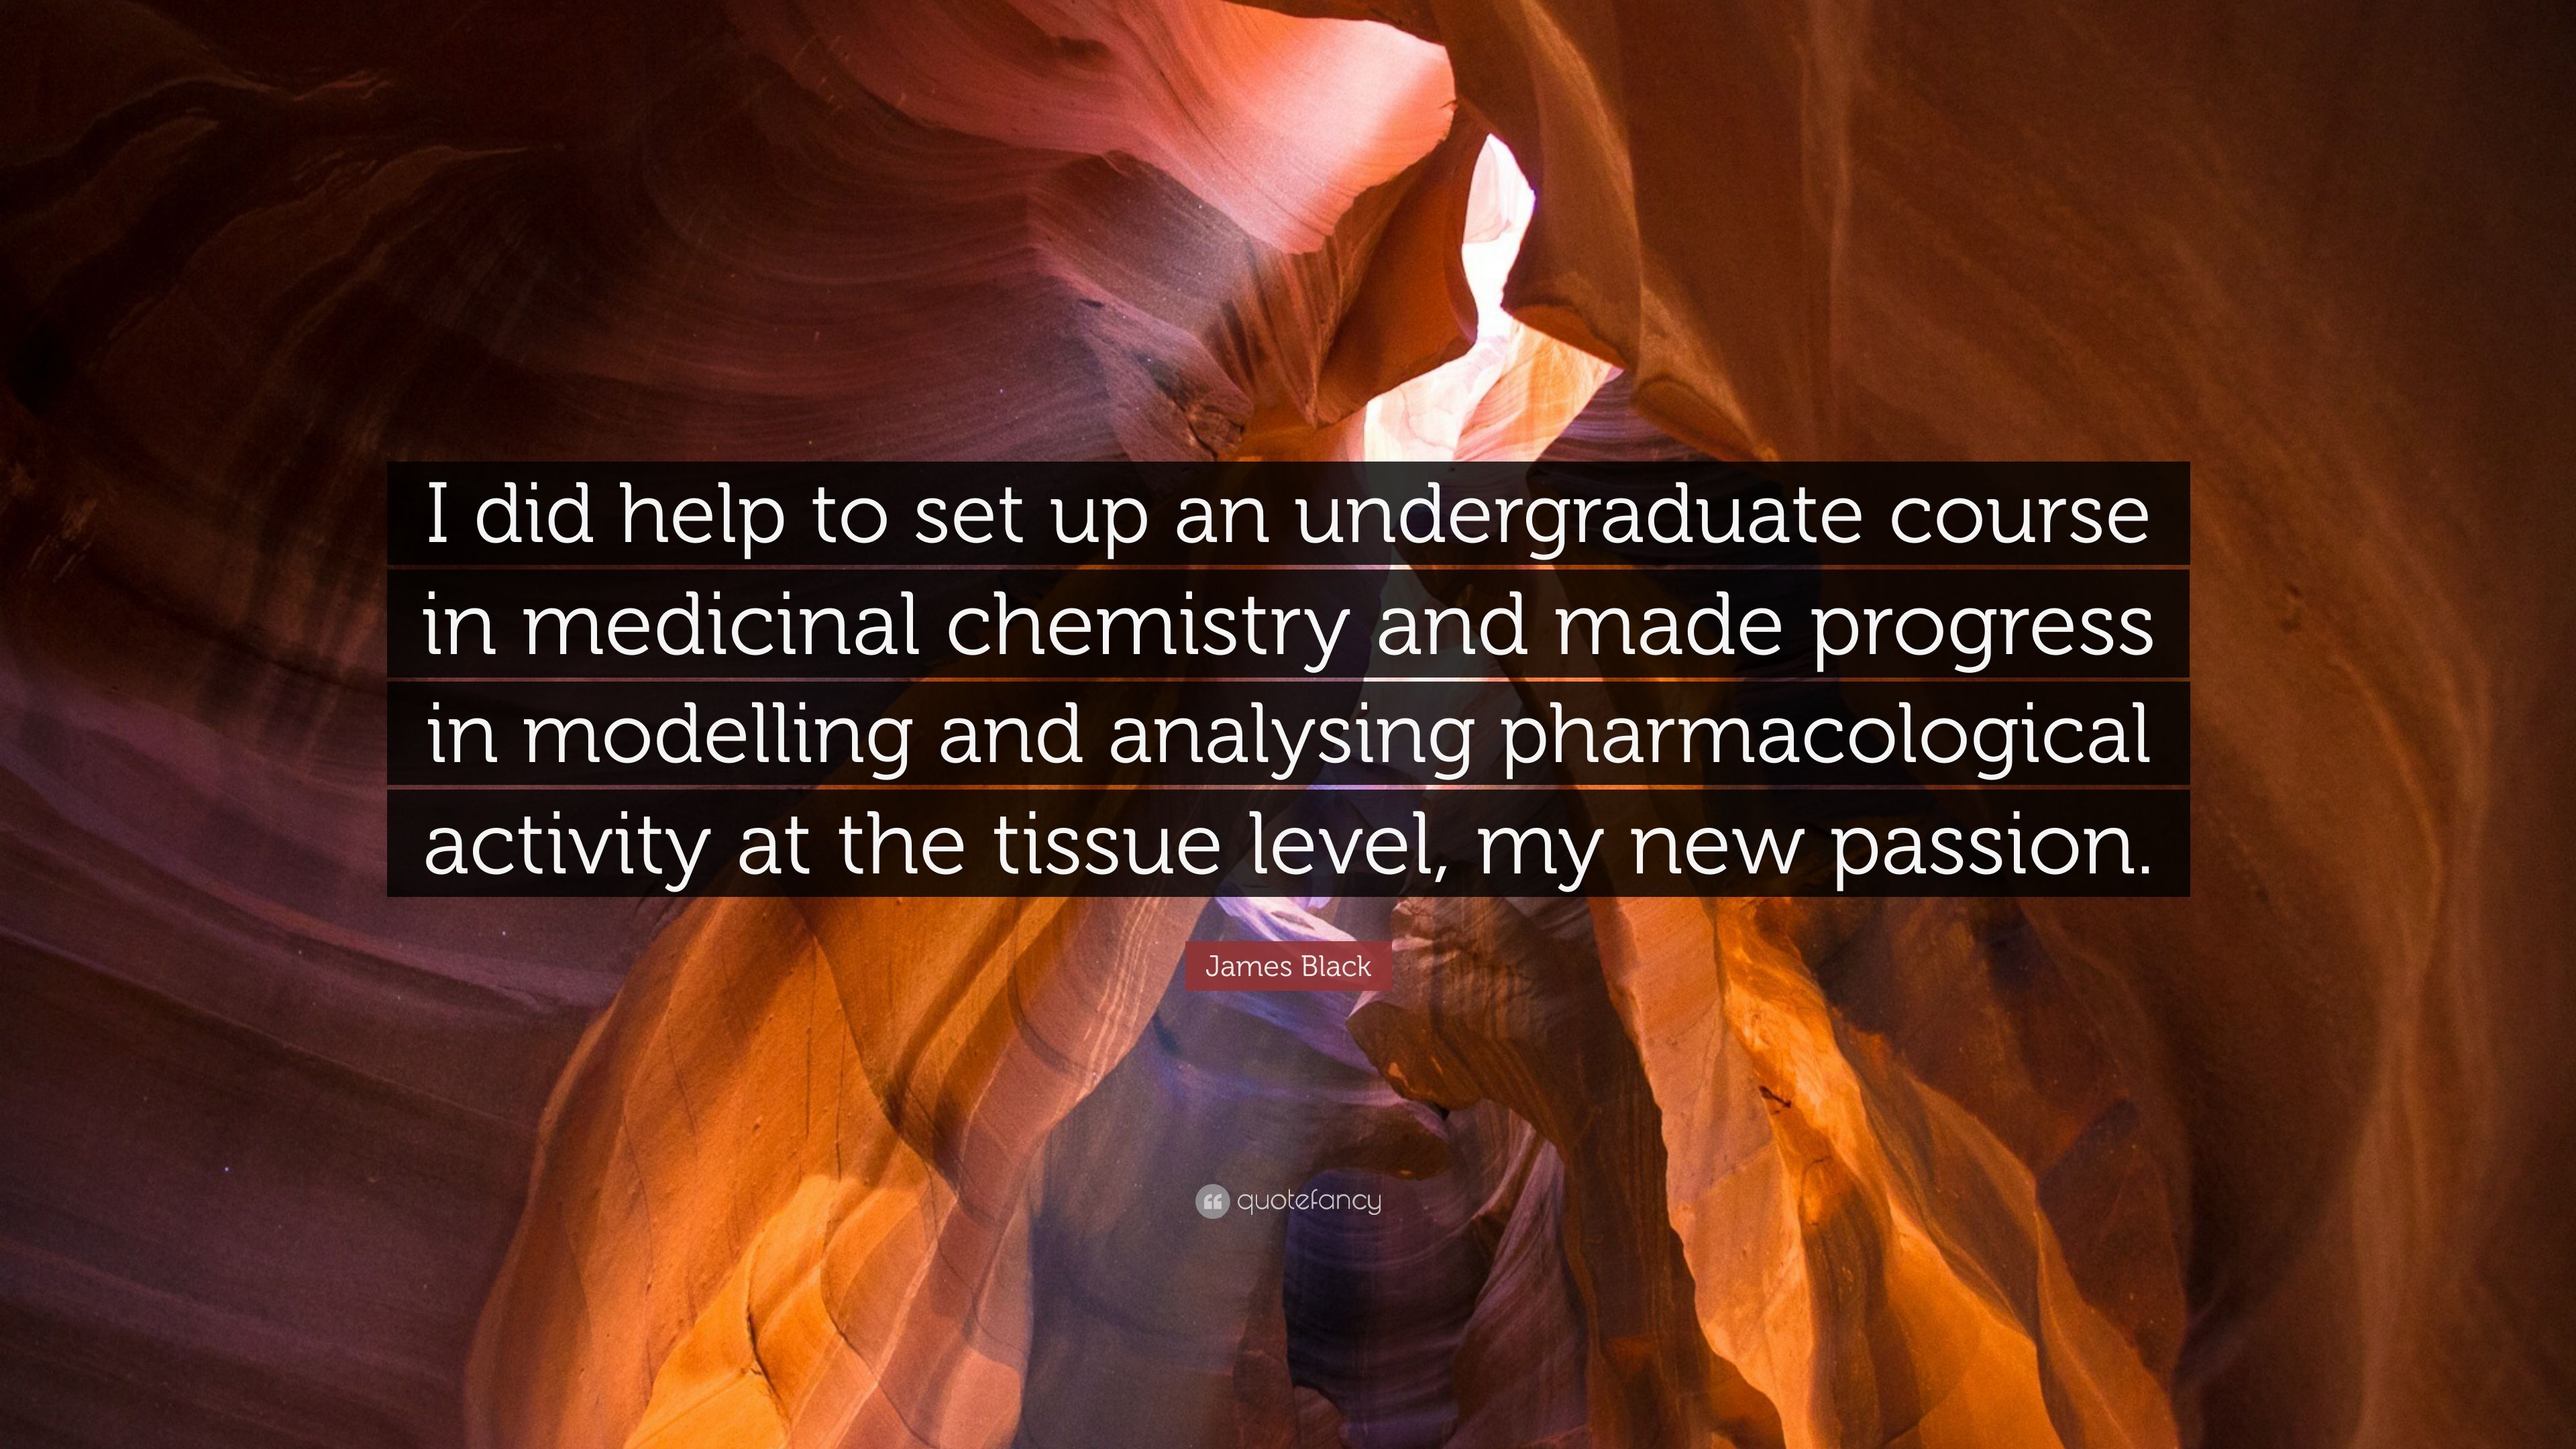 James Black Quote: “I did help to set up an undergraduate course in medicinal chemistry and made progress in modelling and analysing pharmac.” (7 wallpaper)